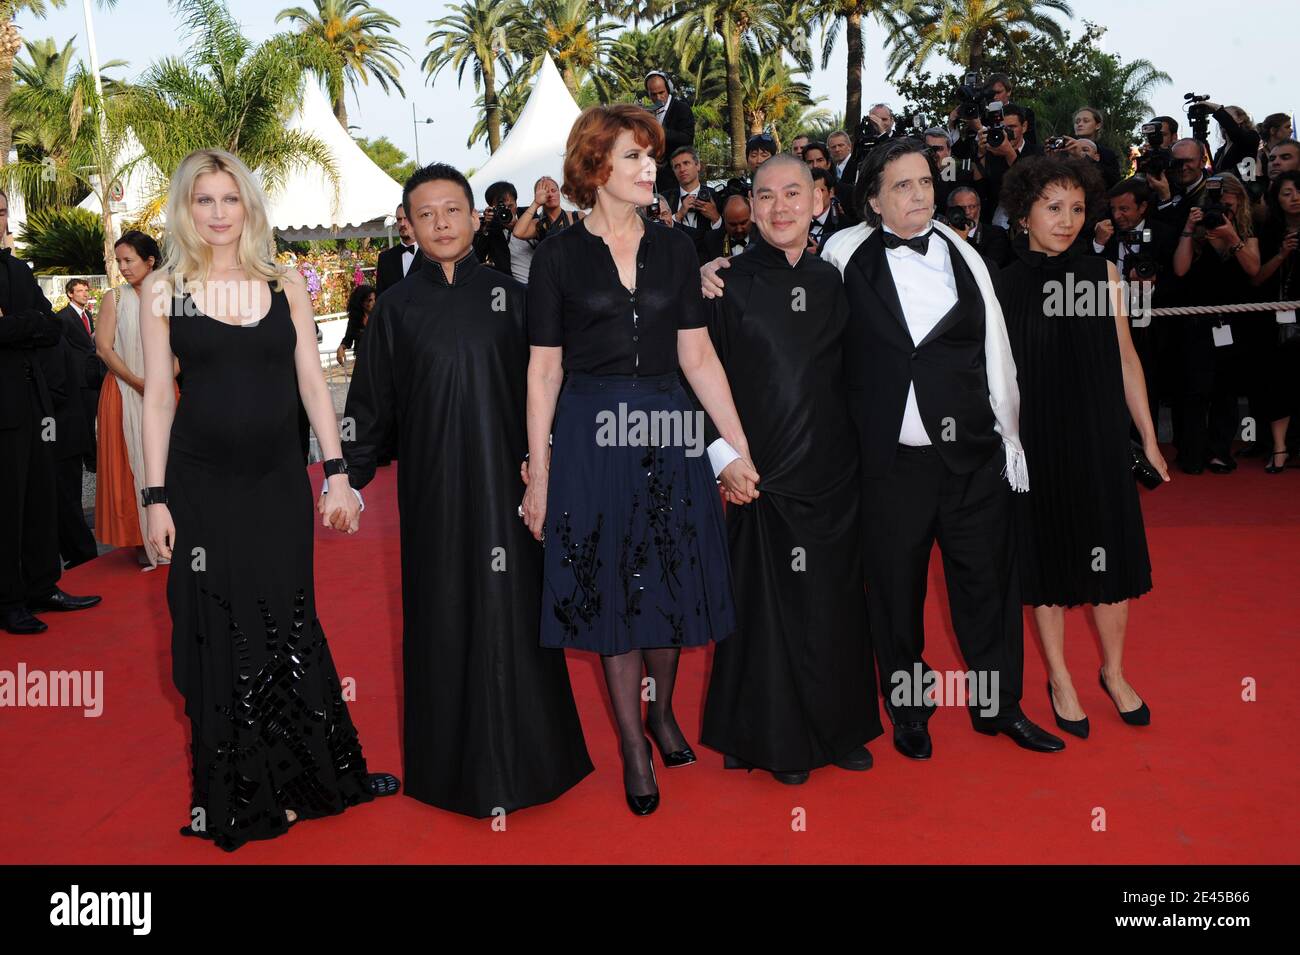 'Yi-Ching Lu, Jean-Pierre Leaud, Ming-liang Tsai, Fanny Ardant, Kang-sheng Lee and Laetitia Casta attend the screening of ''Visage'' at the 62nd Cannes Film Festival. Cannes, France, May 23, 2009. Photo by Lionel Hahn/ABACAPRESS.COM' Stock Photo